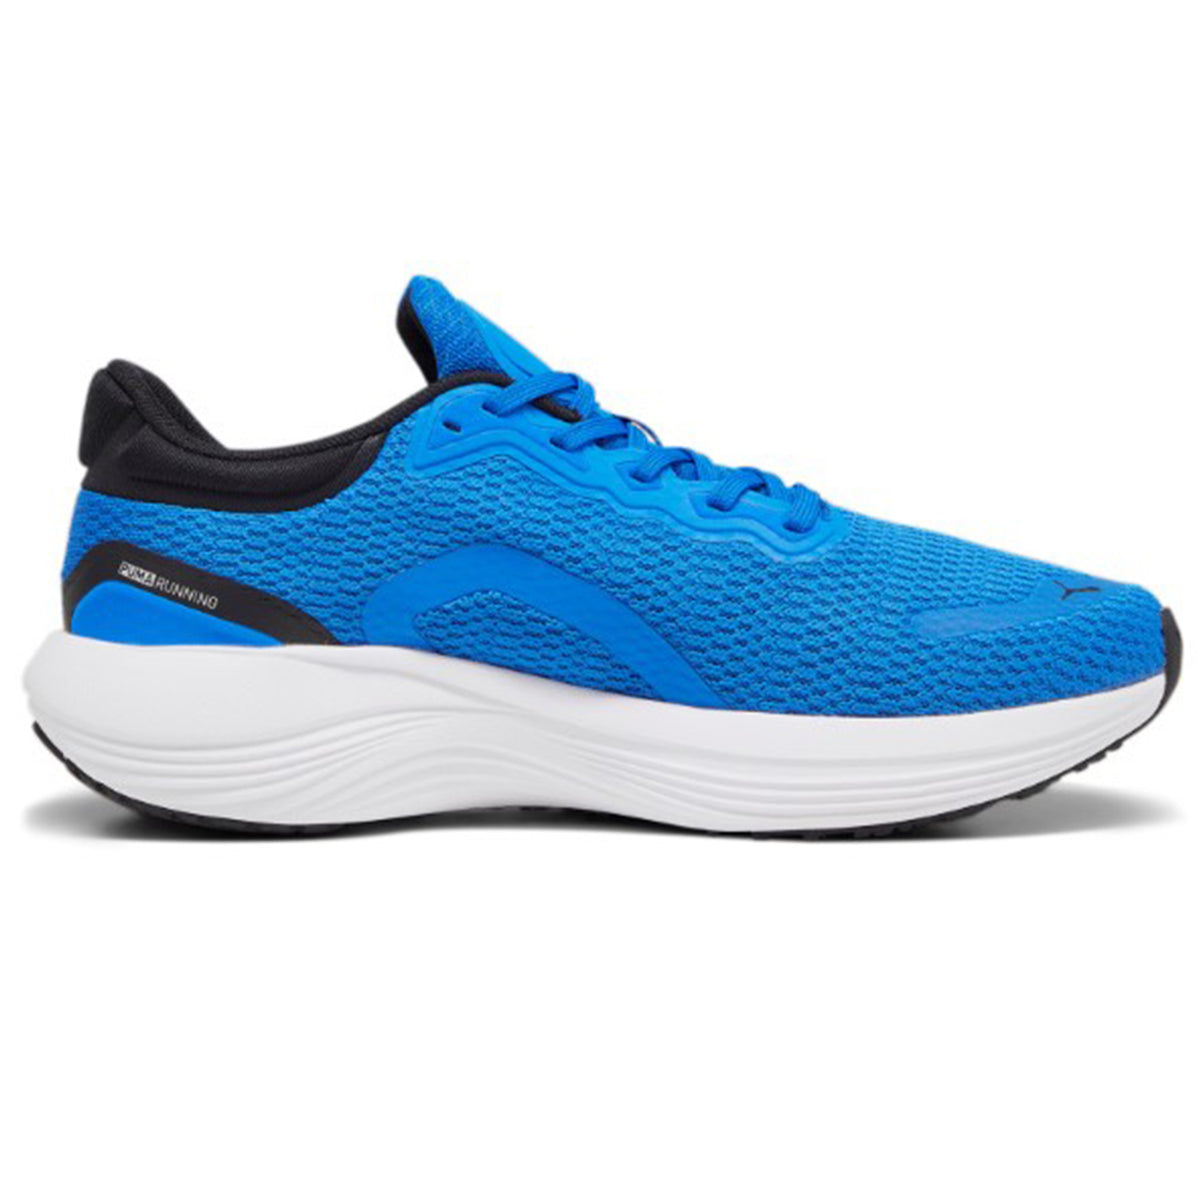 Puma Scend Pro Mens Running Shoes: Ultra Blue/White